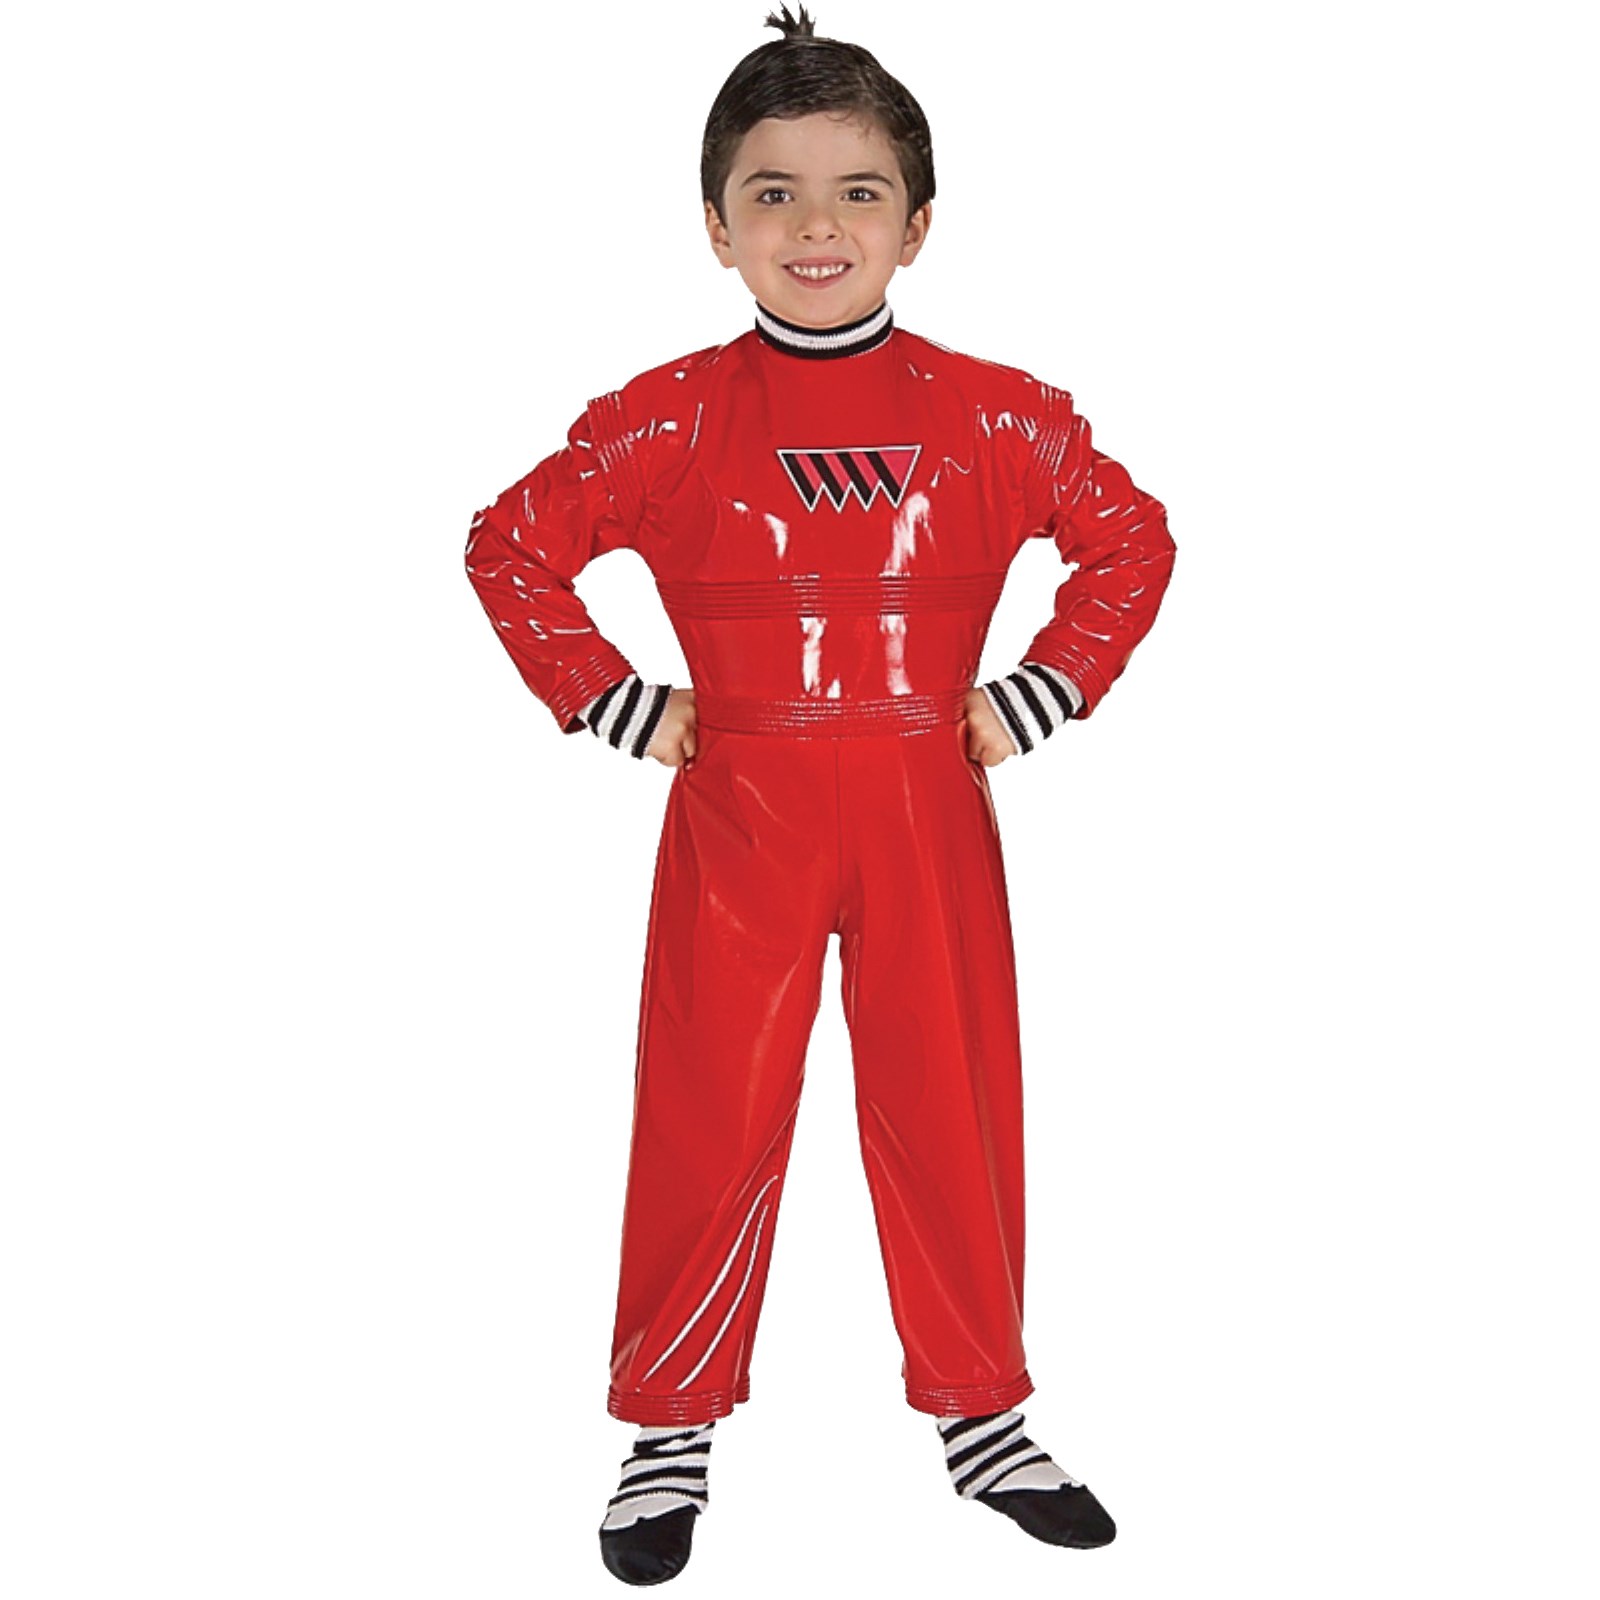 Charlie and the Chocolate Factory Oompa Loompa Child Costume